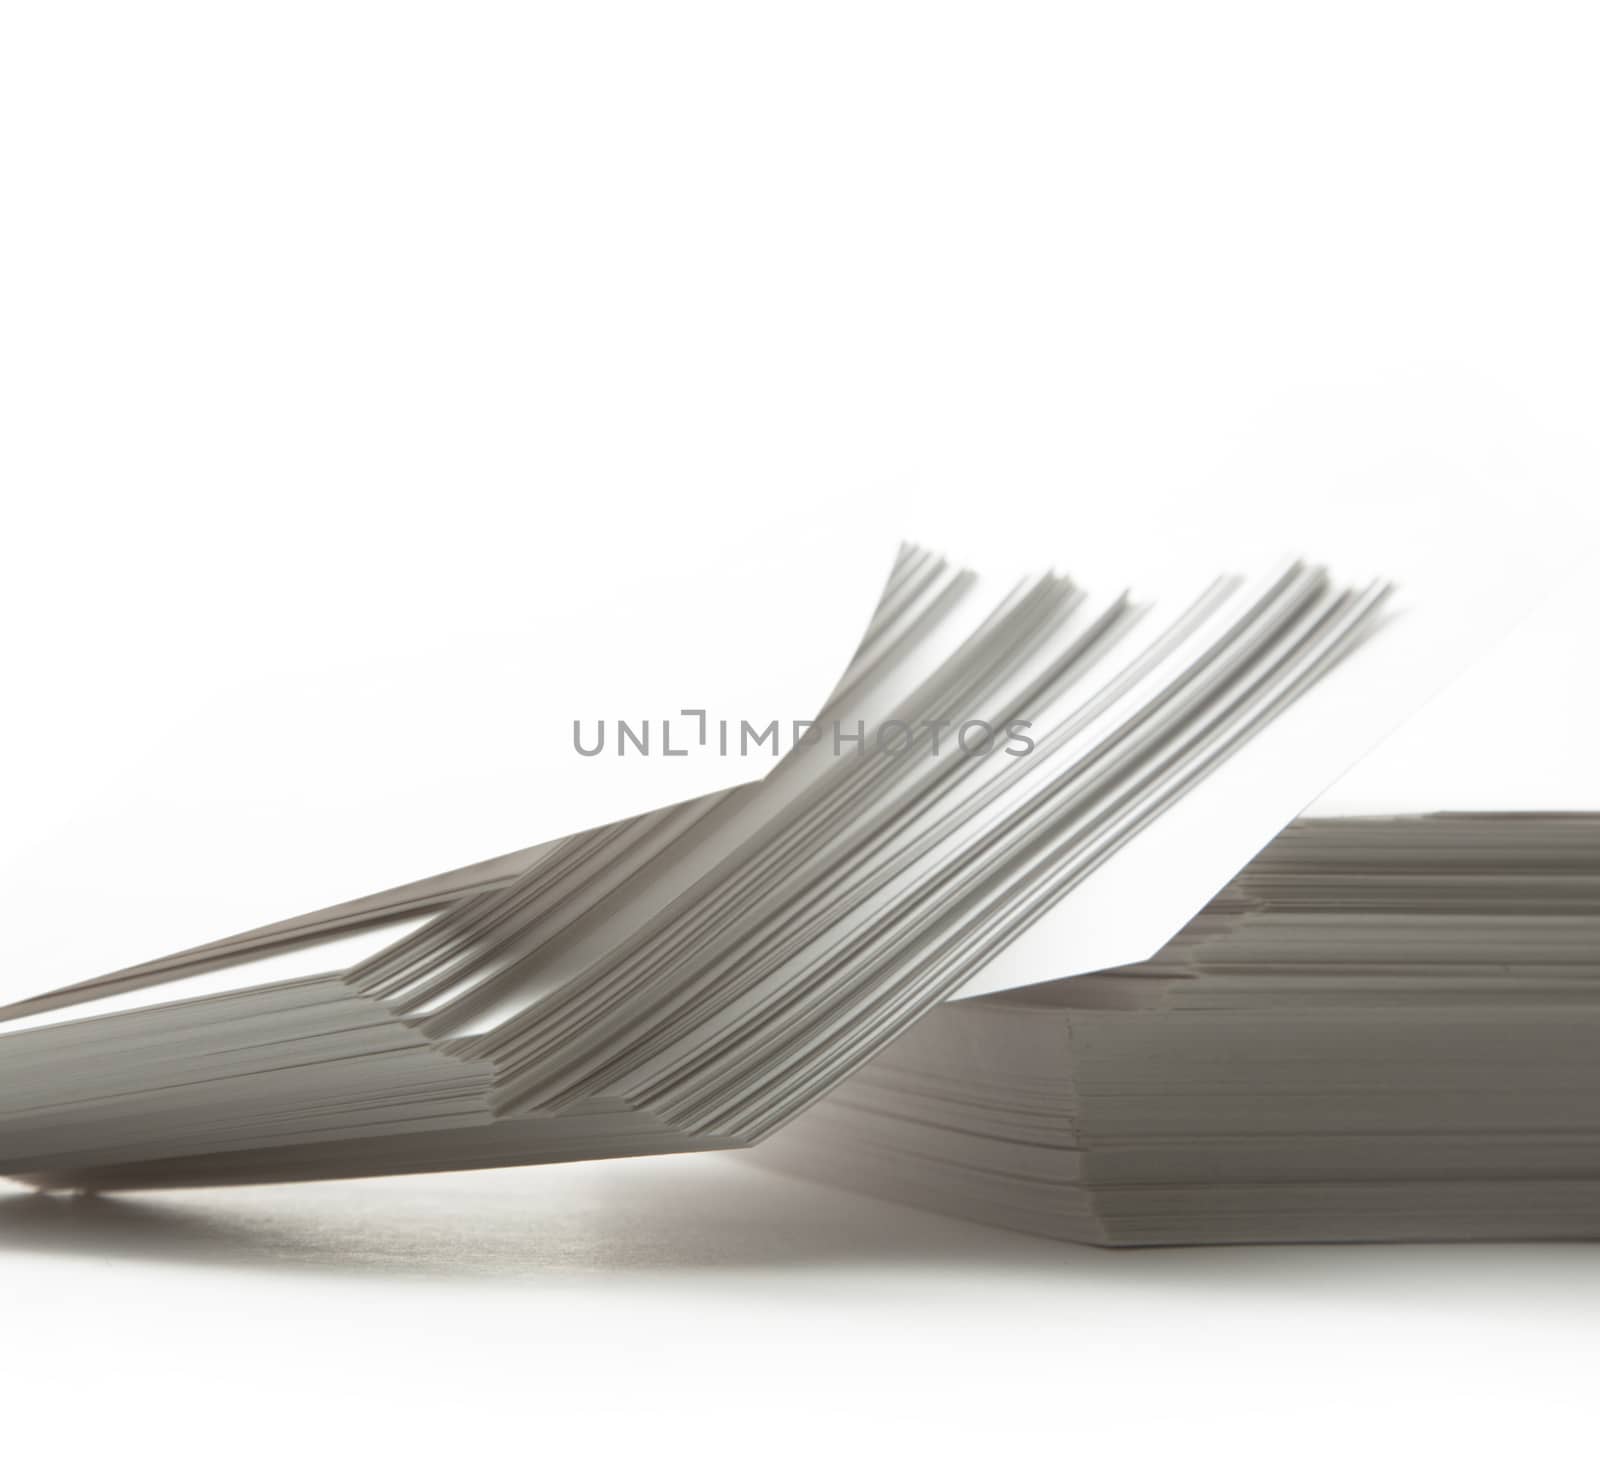 Stack of white paper cards by Garsya